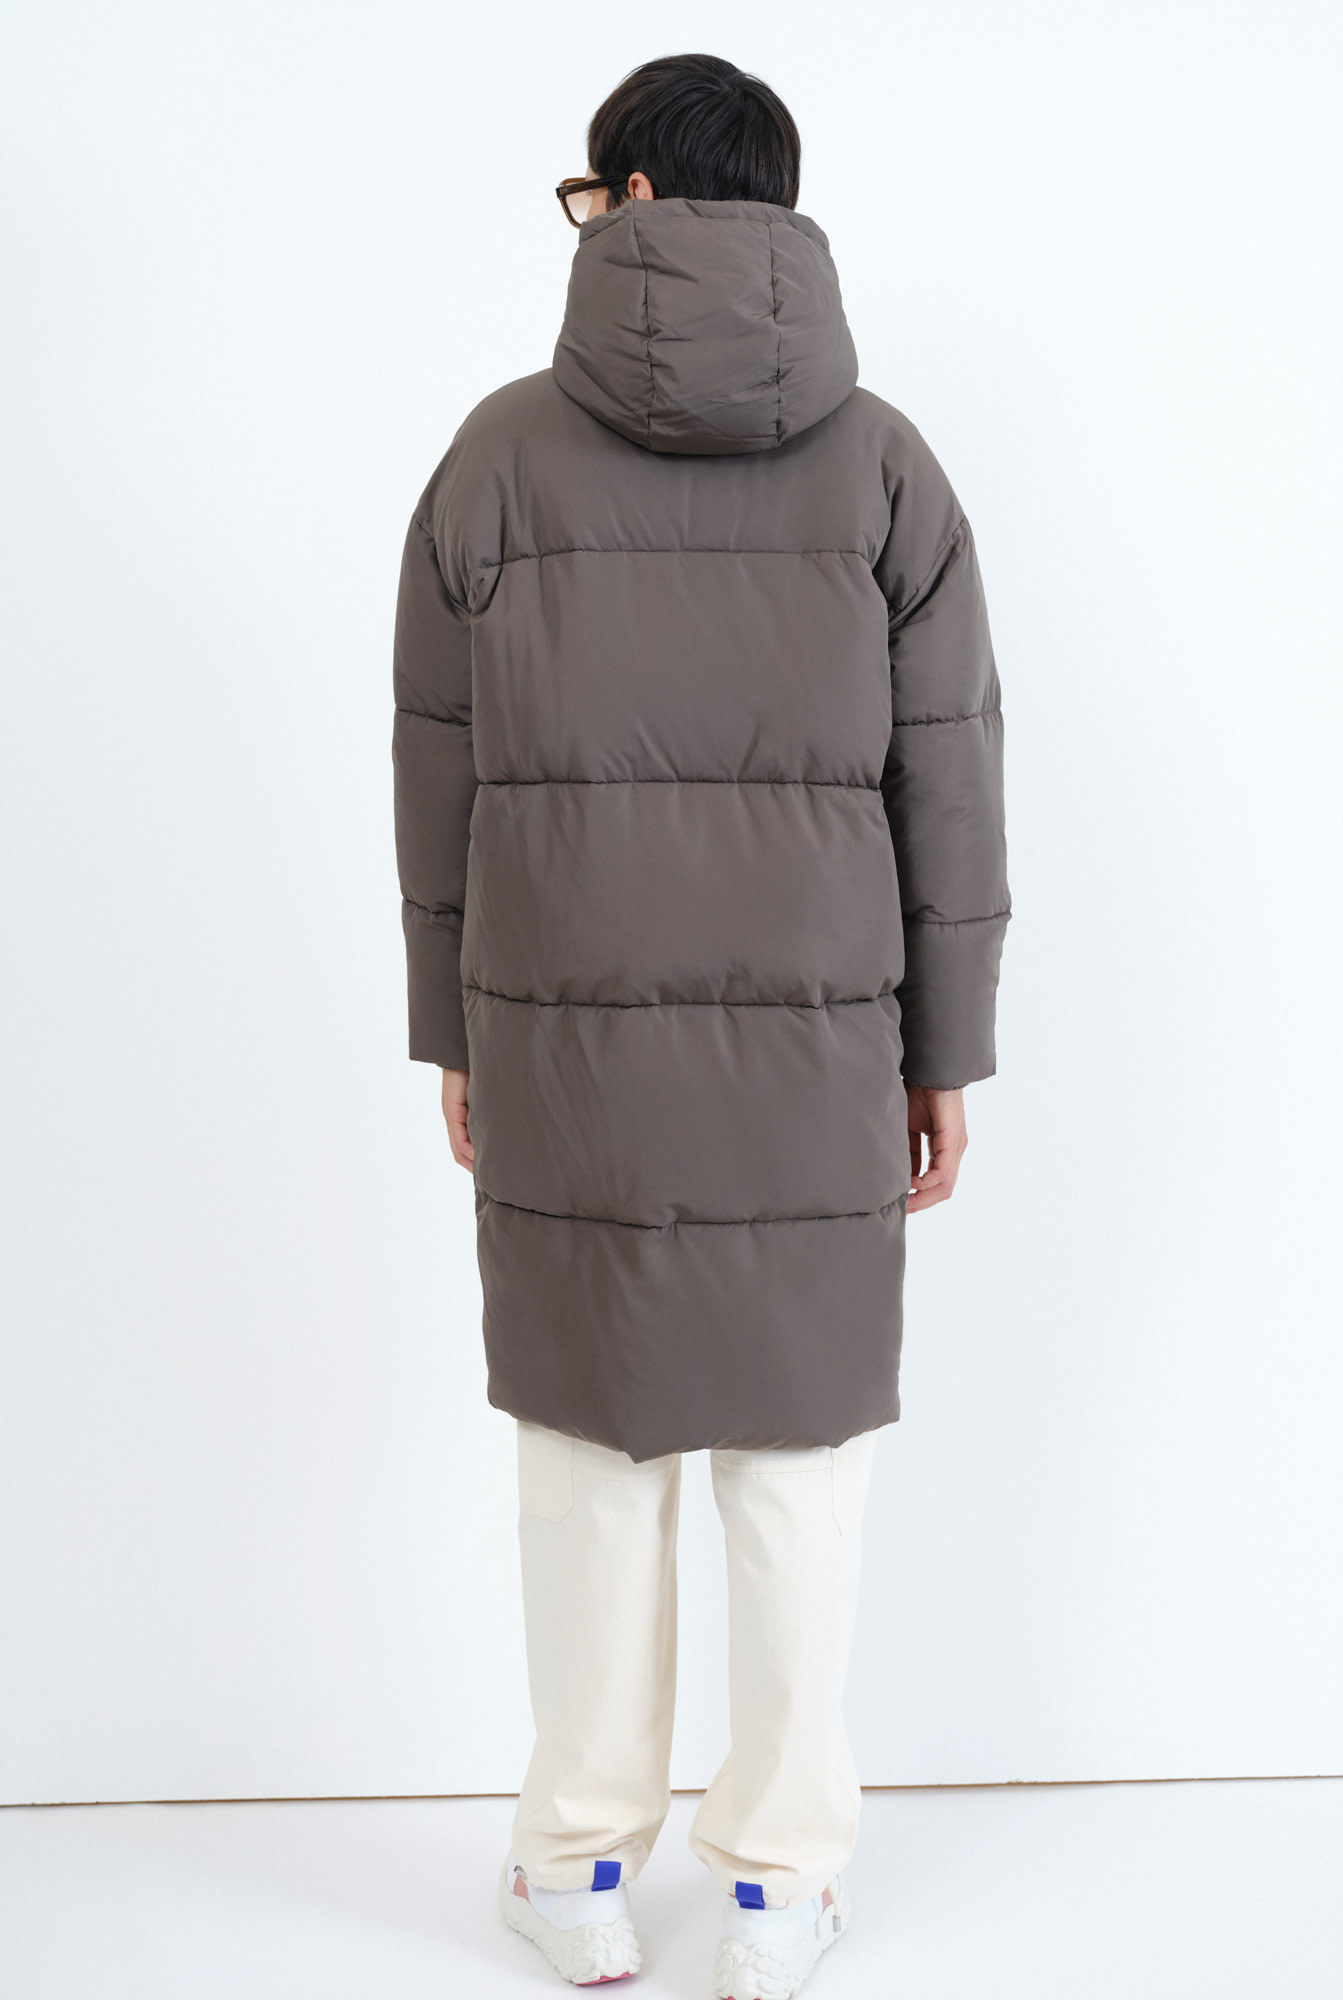 Embassy of Bricks and Logs Embassy of Bricks and Logs, Elphin Puffer Coat, black olive, S